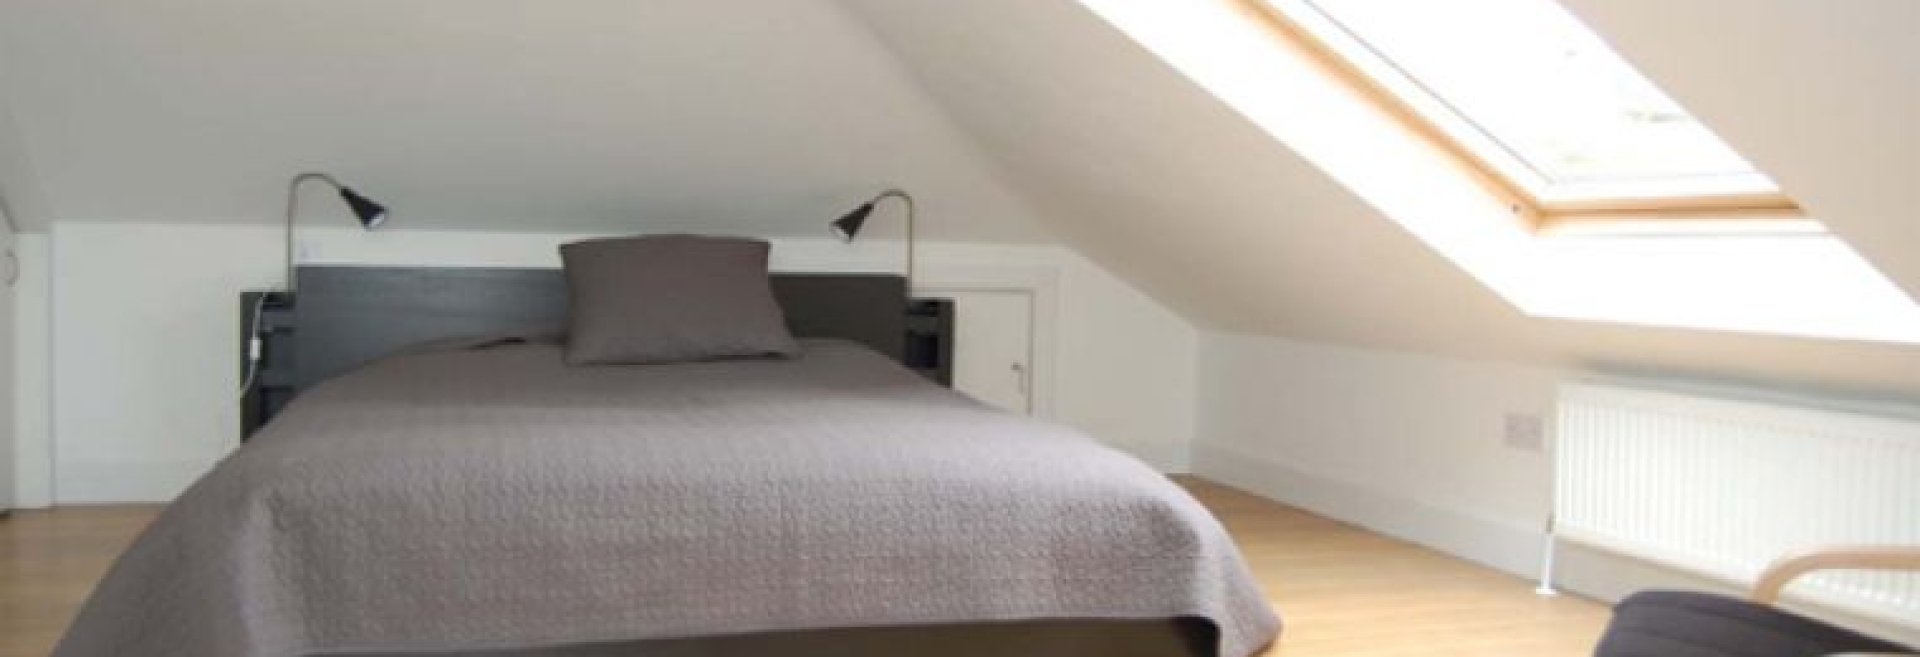 Loft Conversion - Tooting, South West London